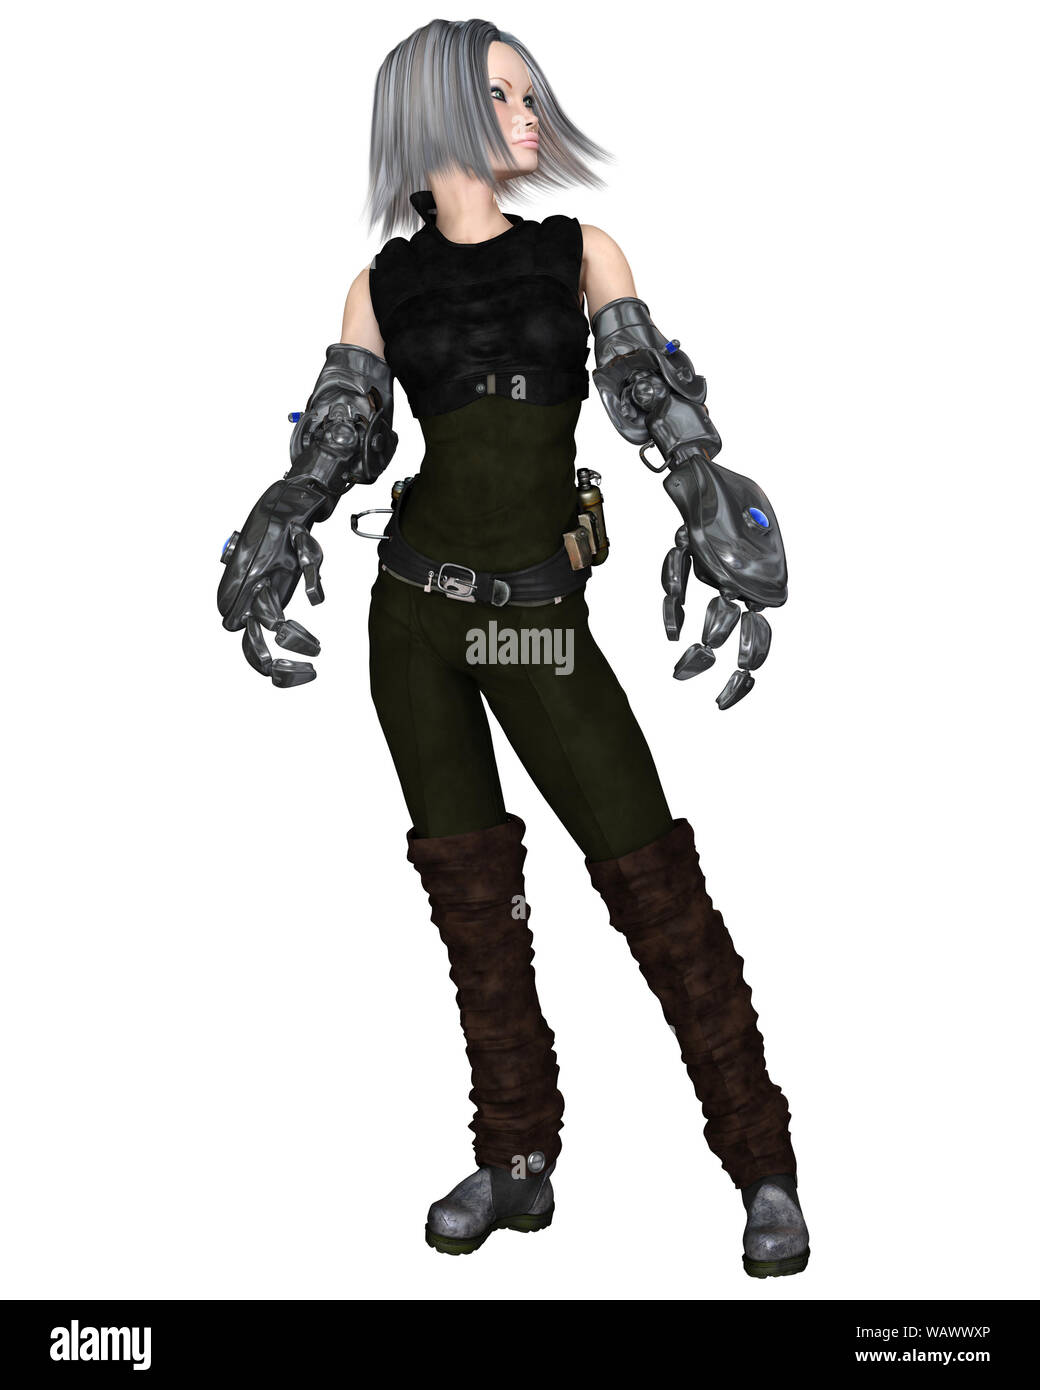 Female Cyber Soldier Standing Stock Photo